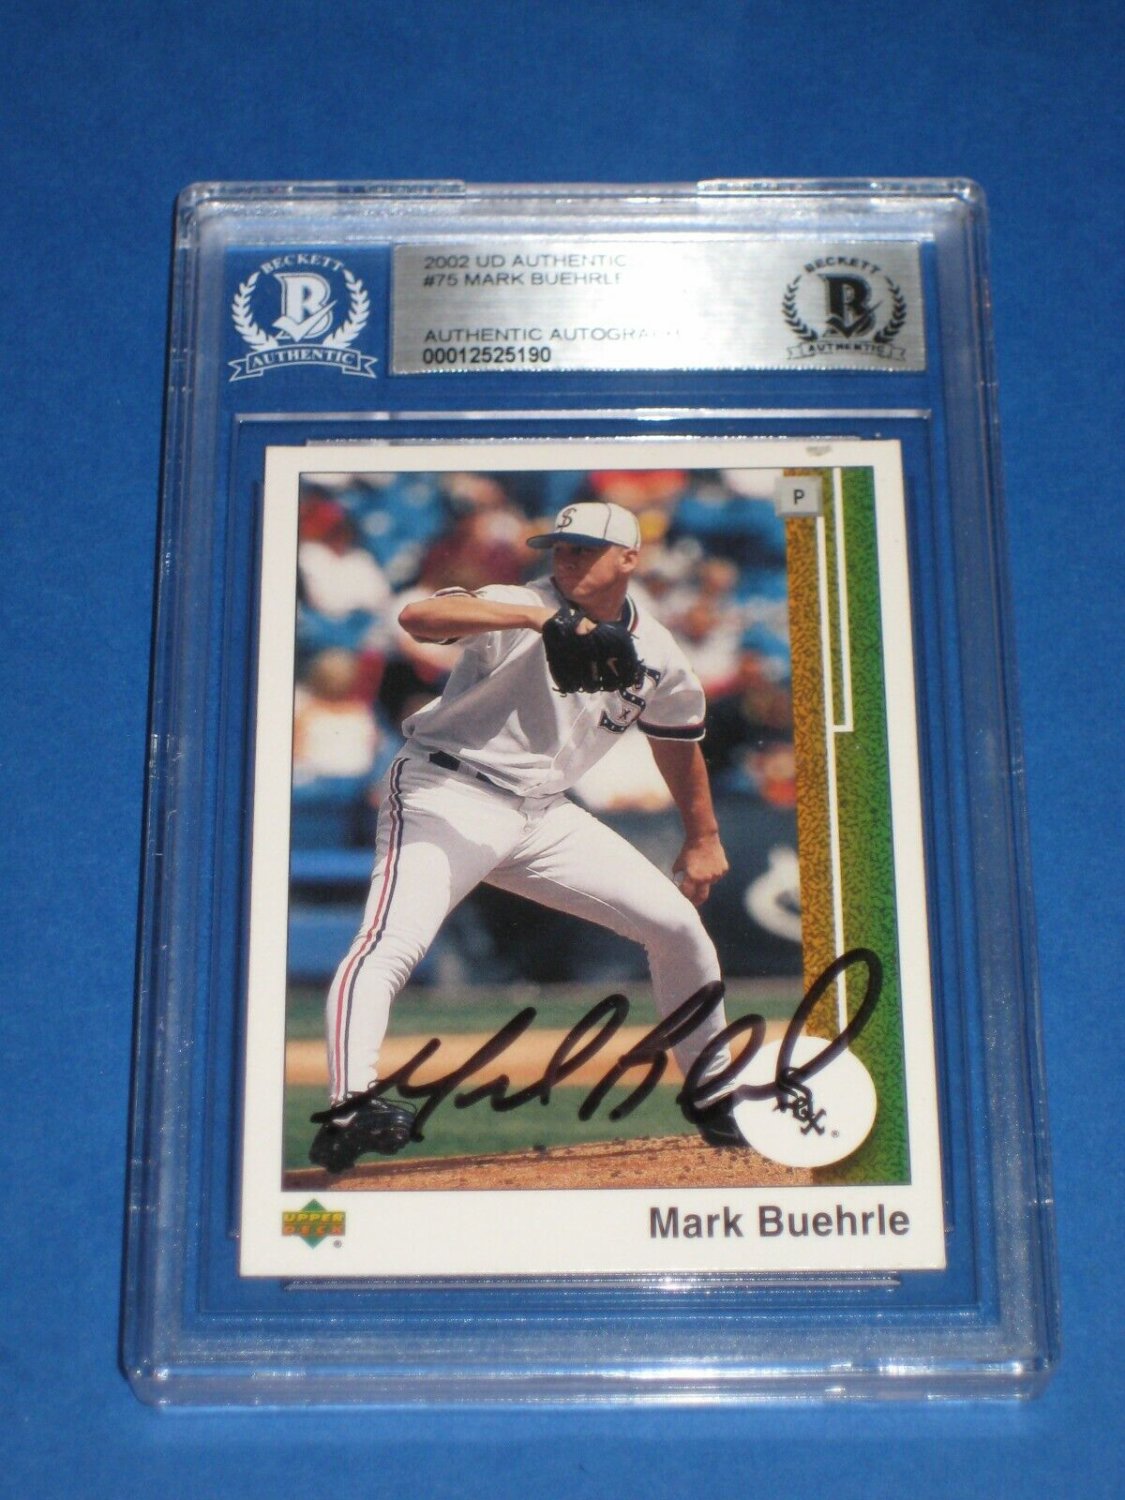 Mark Buehrle Autographed Signed 2002 UDA Authentics Card #75 Beckett  Authenticated